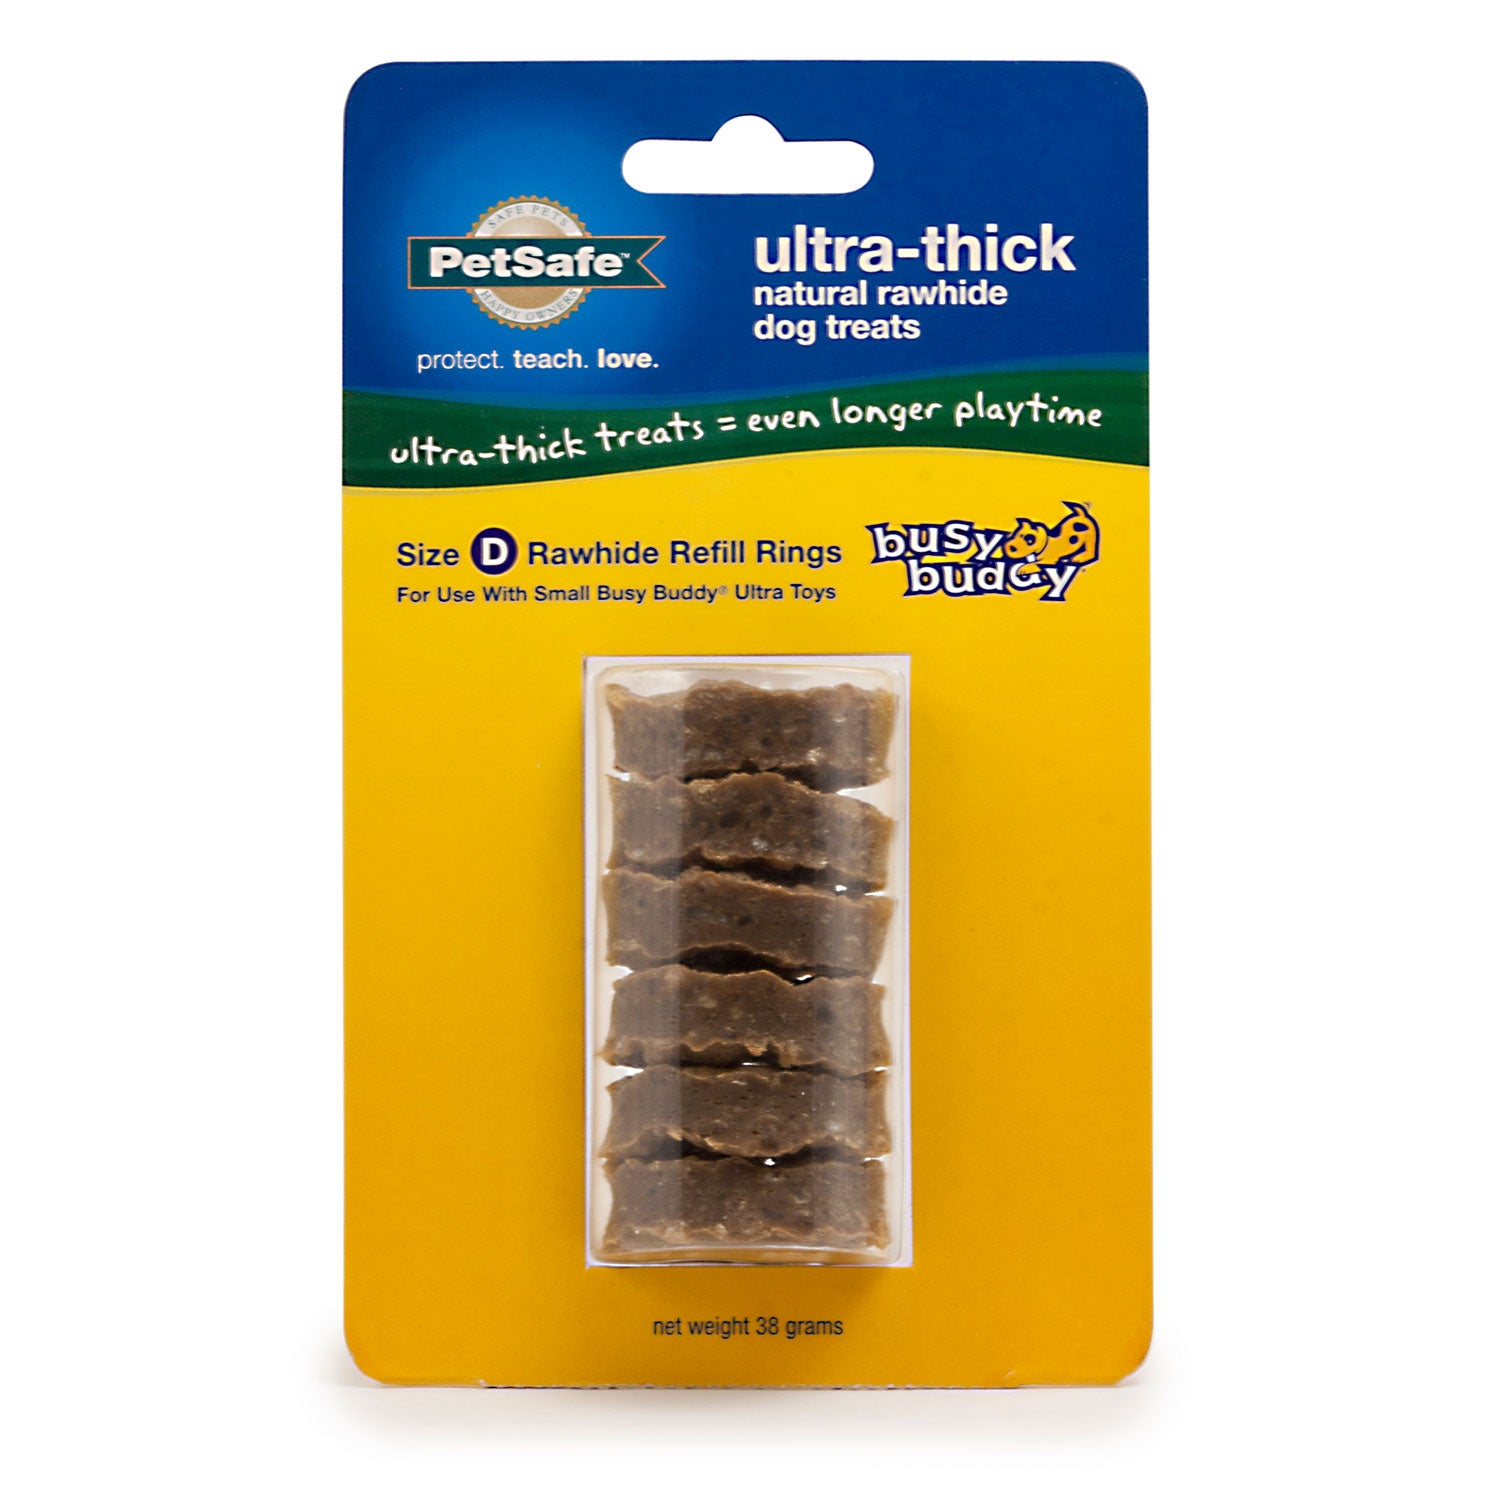 Busy Buddy Ultra-Thick Natural Rawhide Rings Refill